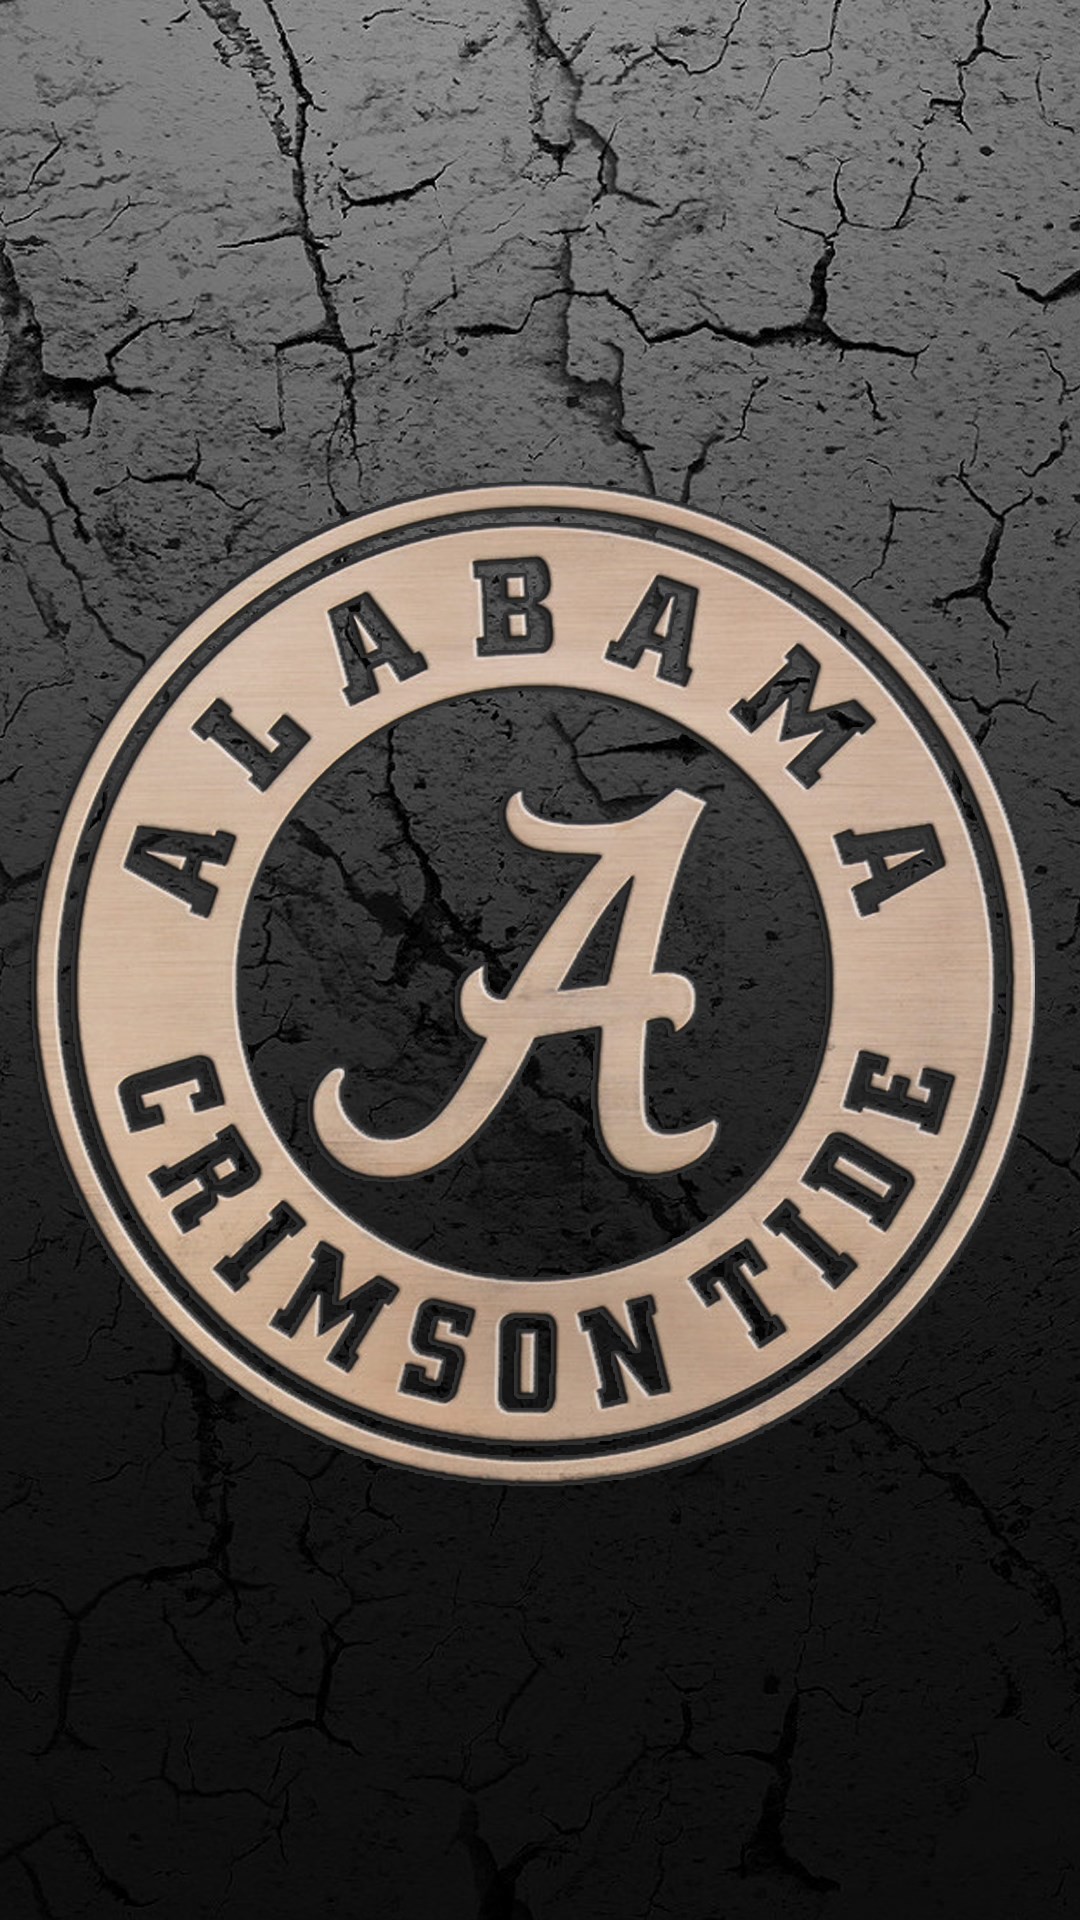 Alabama Football Wallpaper 2018 57 Pictures